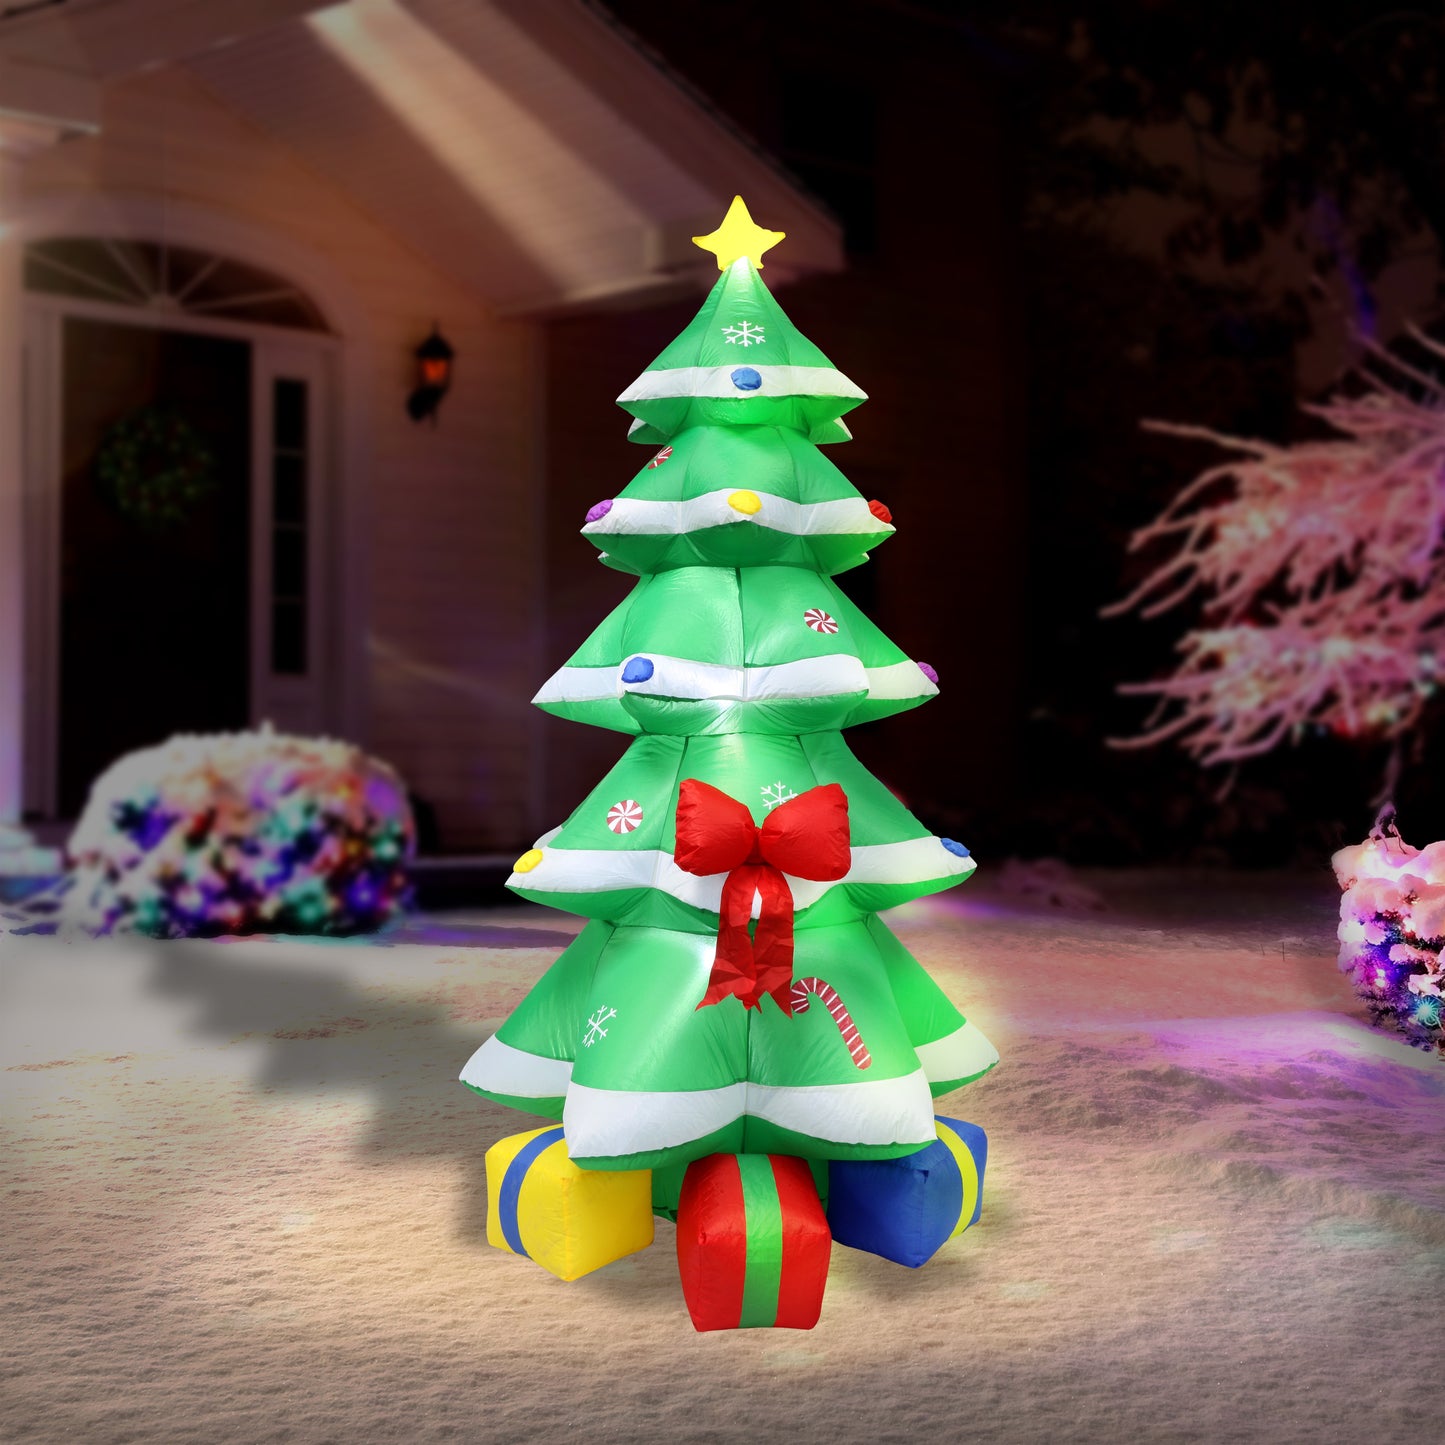 6' Outdoor LED Lighted Inflatable Christmas Tree, Green